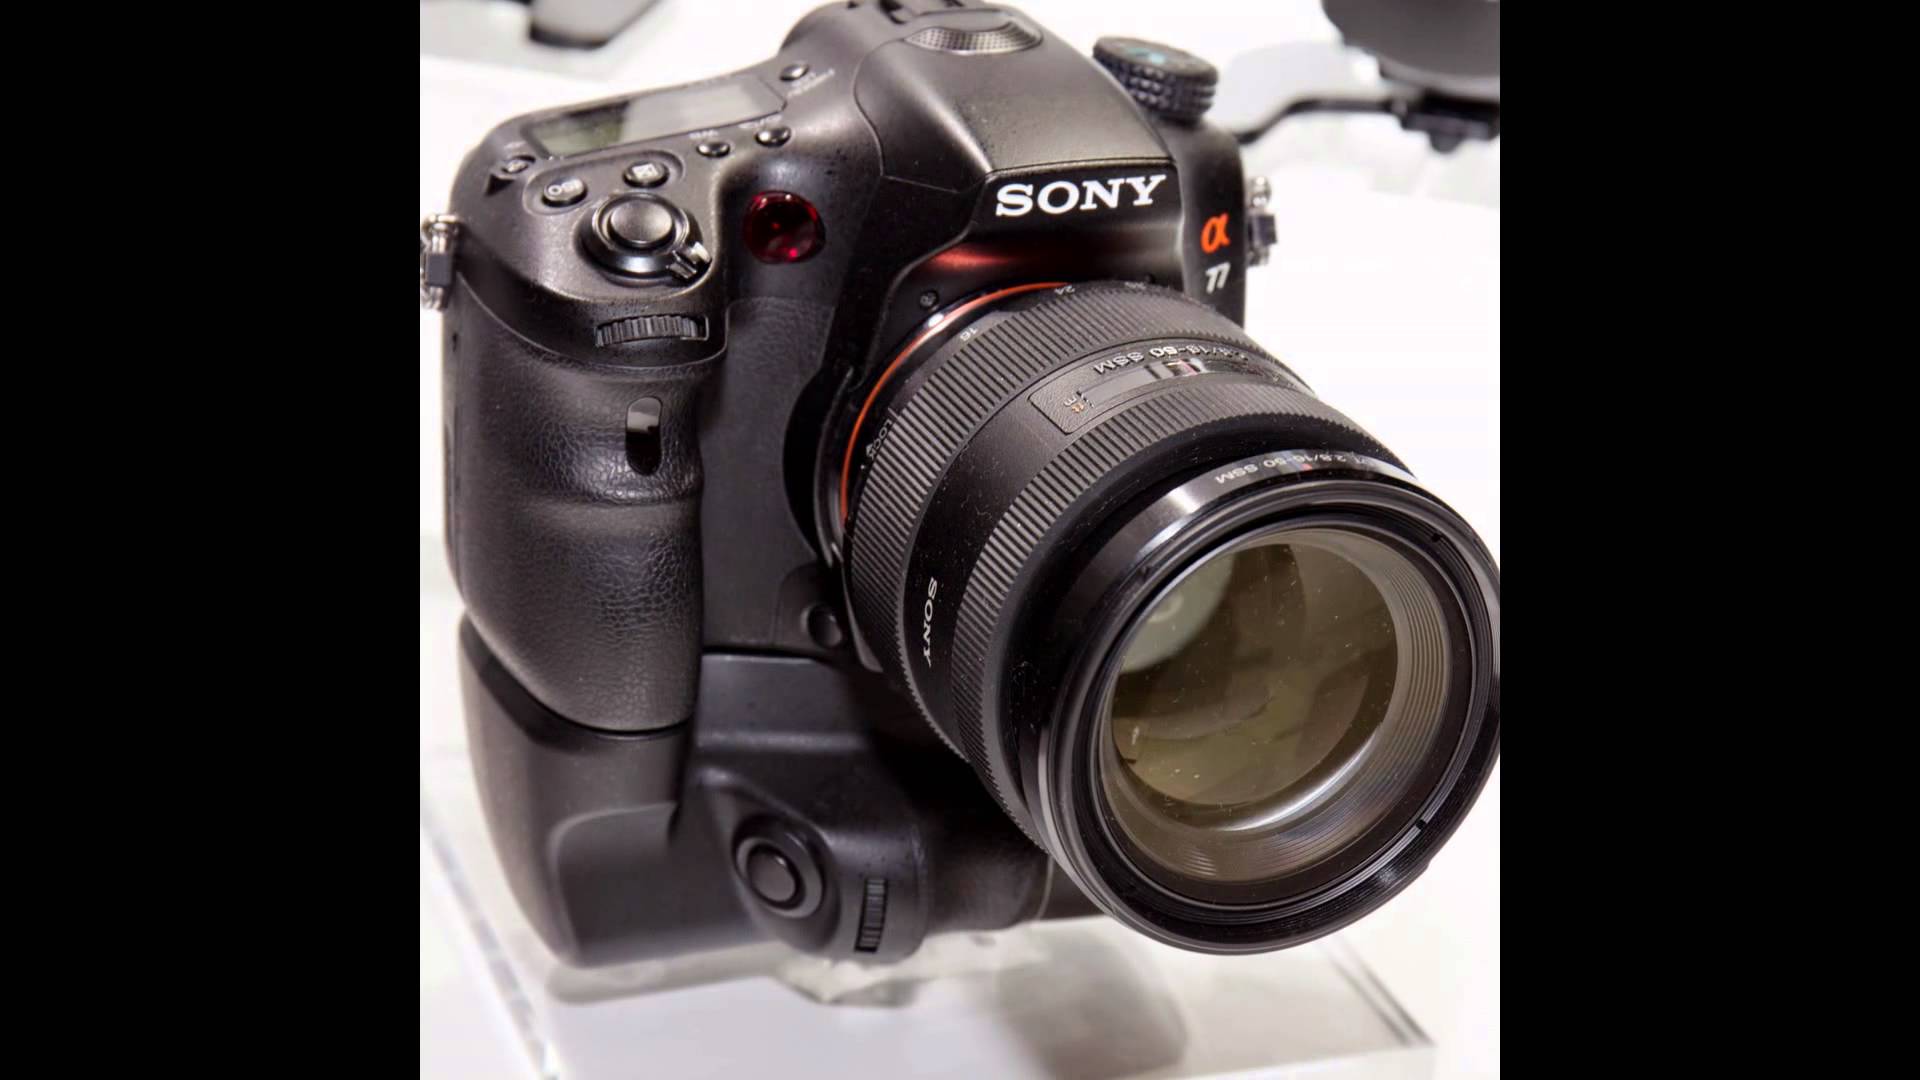 Sony SLT A77 the 8th best dslr camera in the world